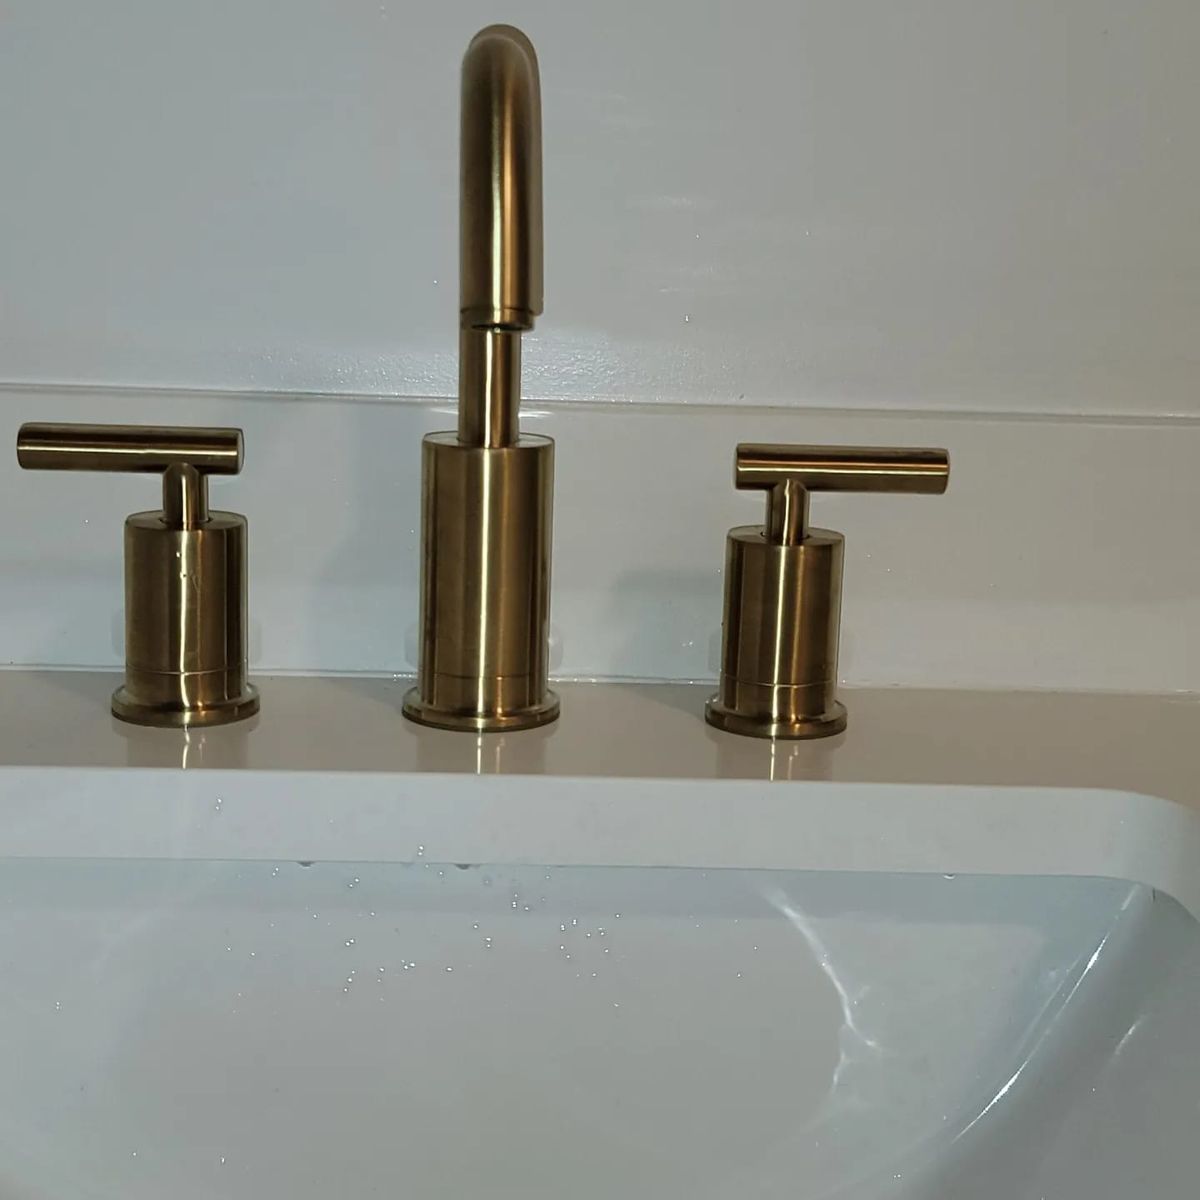 $49 Sink Drain Cleaning for A-Team Plumbing Services, Inc. in Los Angeles, CA